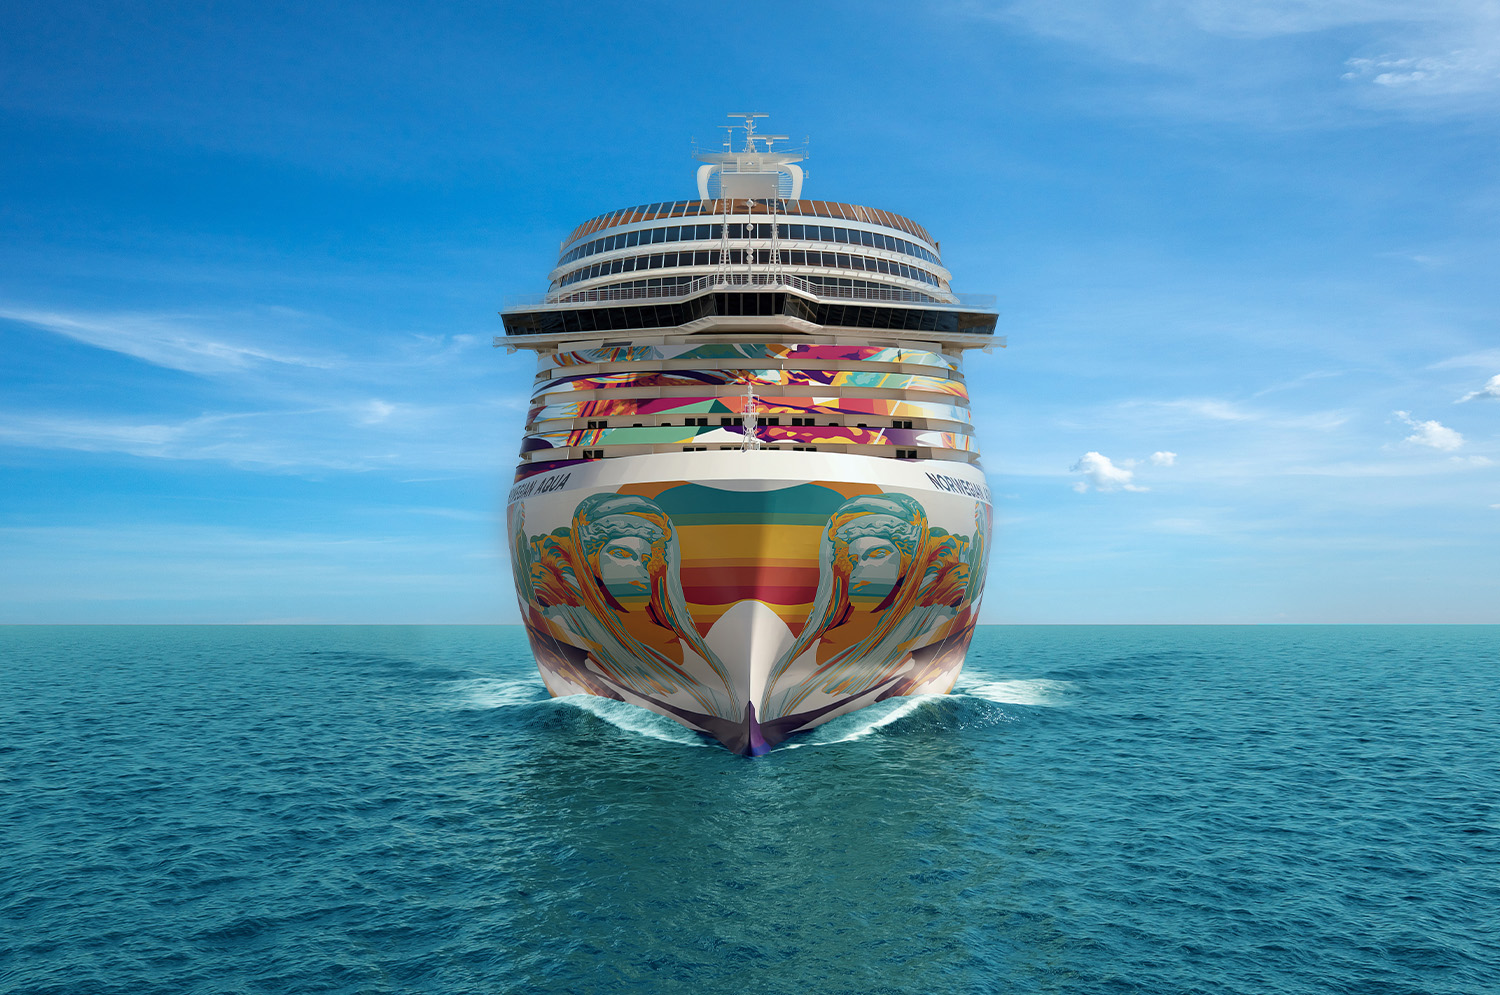 World-renowned artist Allison Hueman will showcase her colorful design “Where the Sky Meets the Sea” across Norwegian Aqua’s hull, making her the Company’s first major female hull artist.